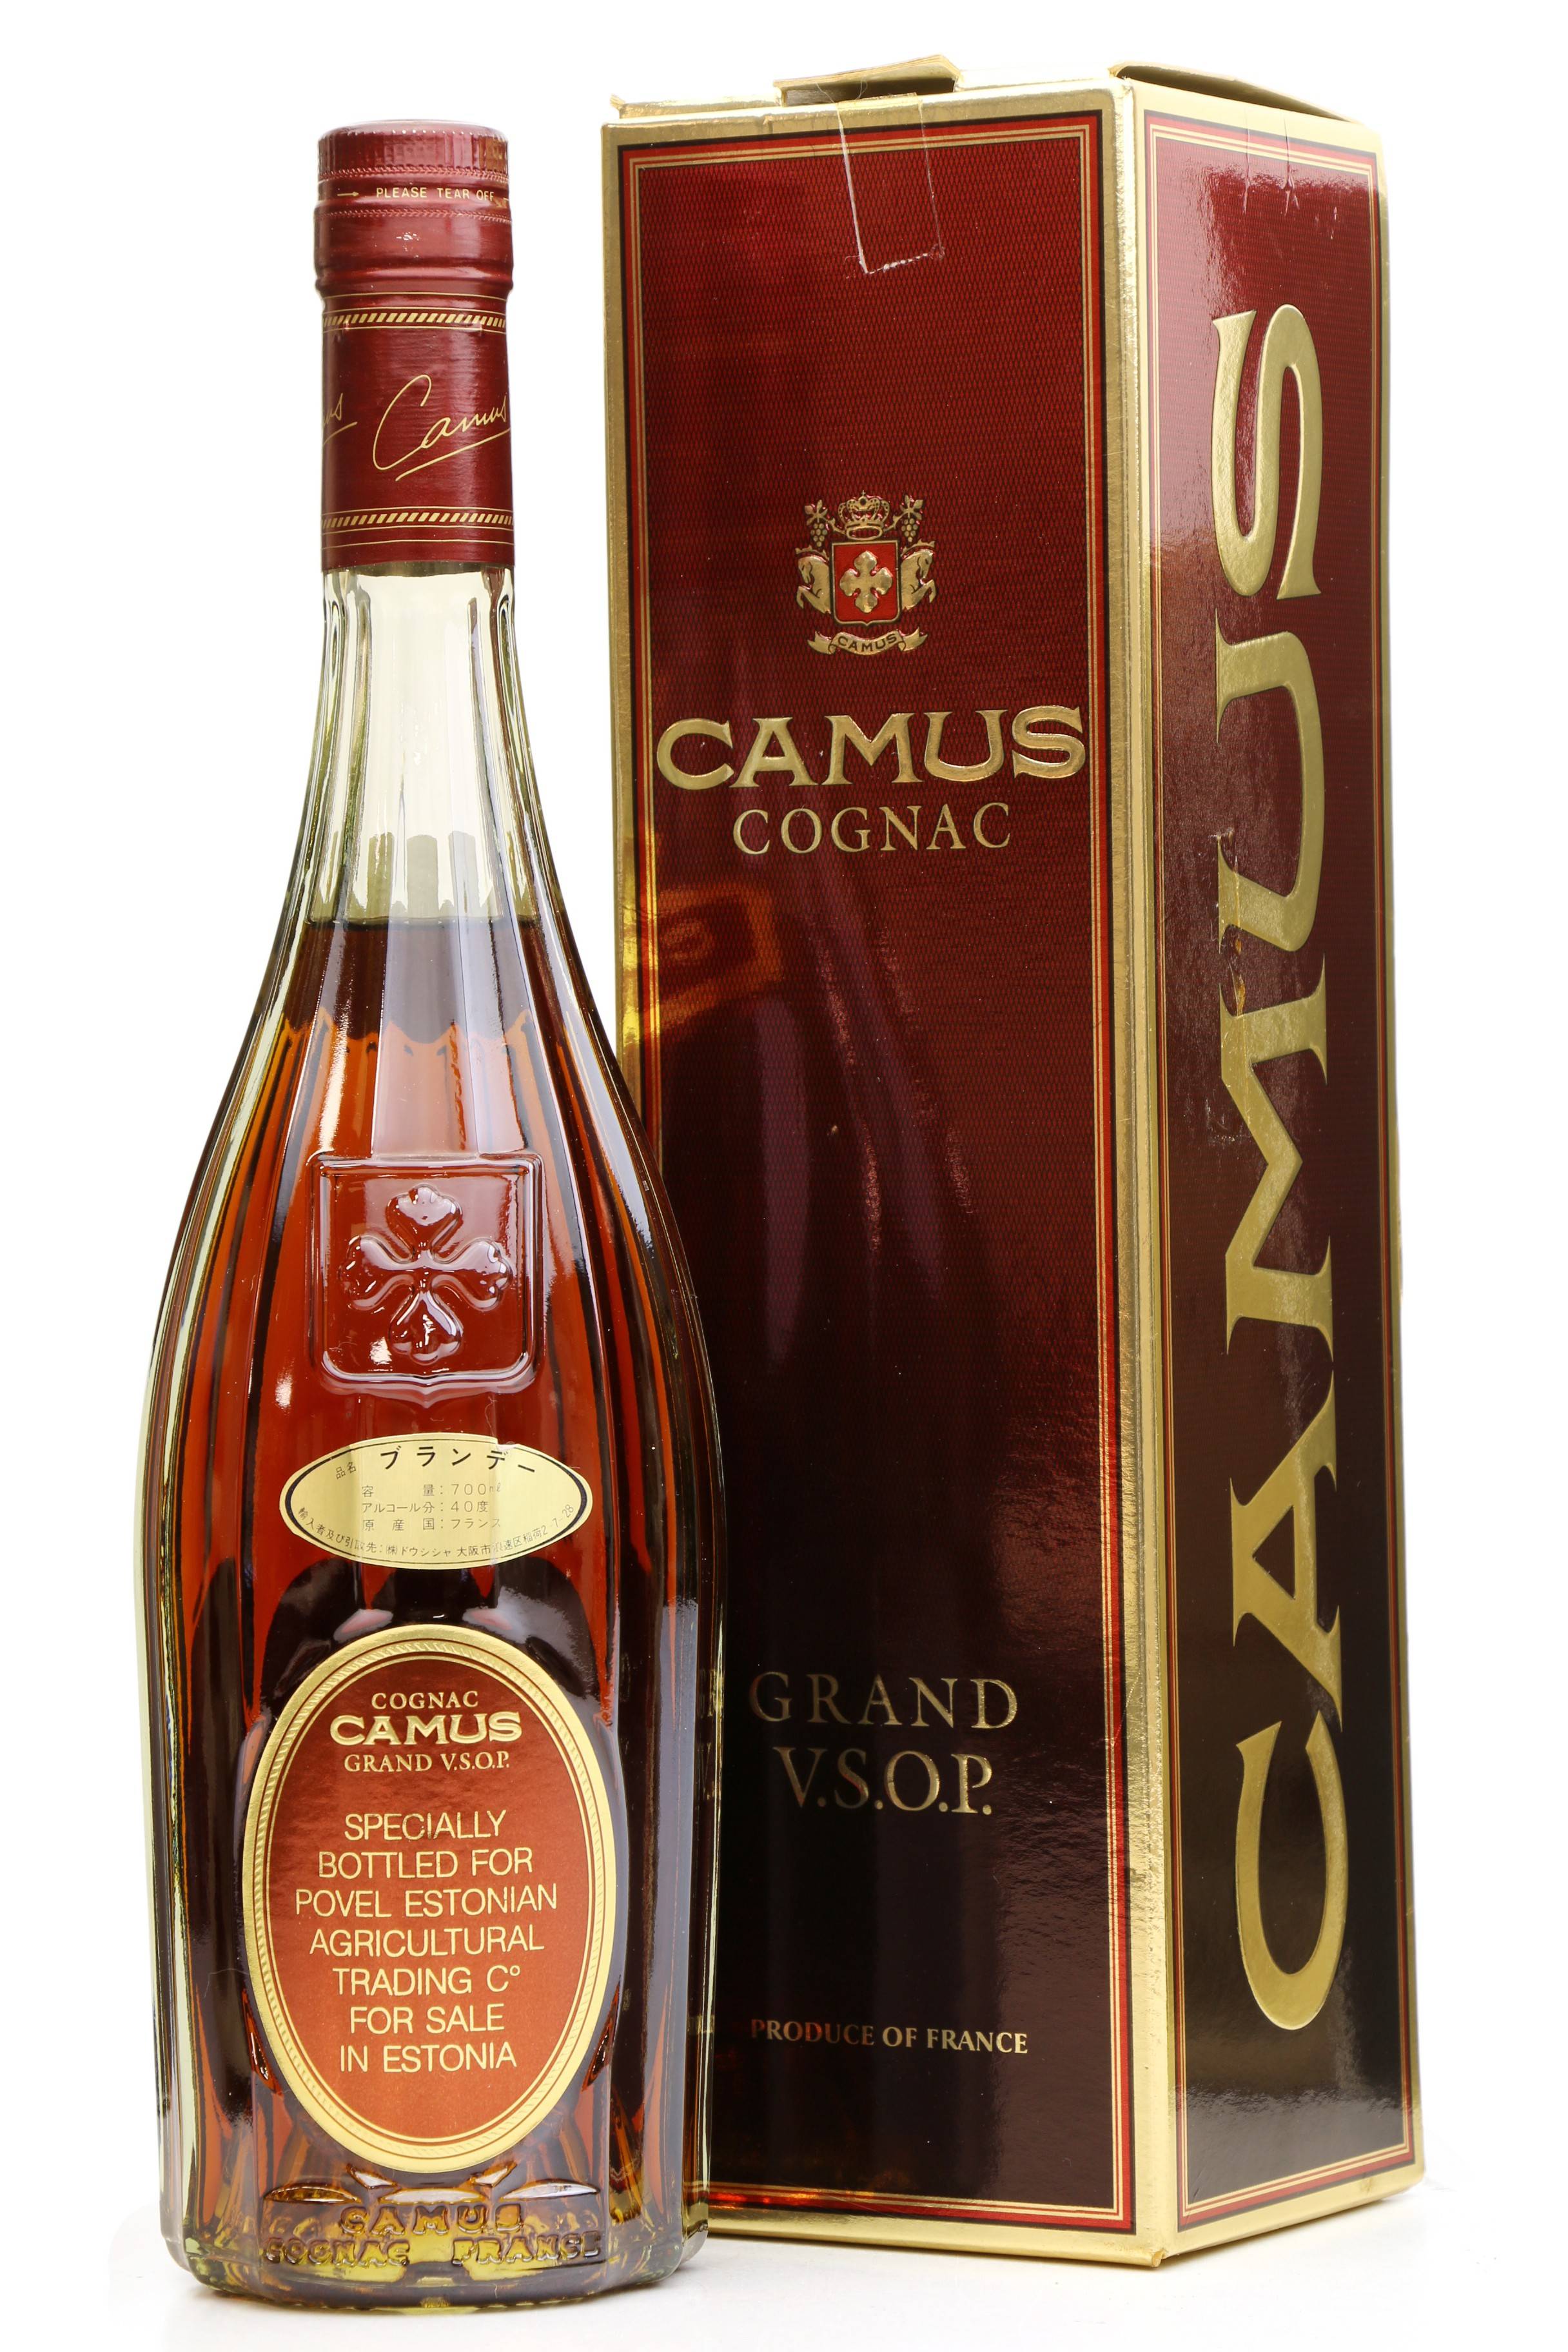 Cambus Grand V.S.O.P. Cognac - Just Whisky Auctions